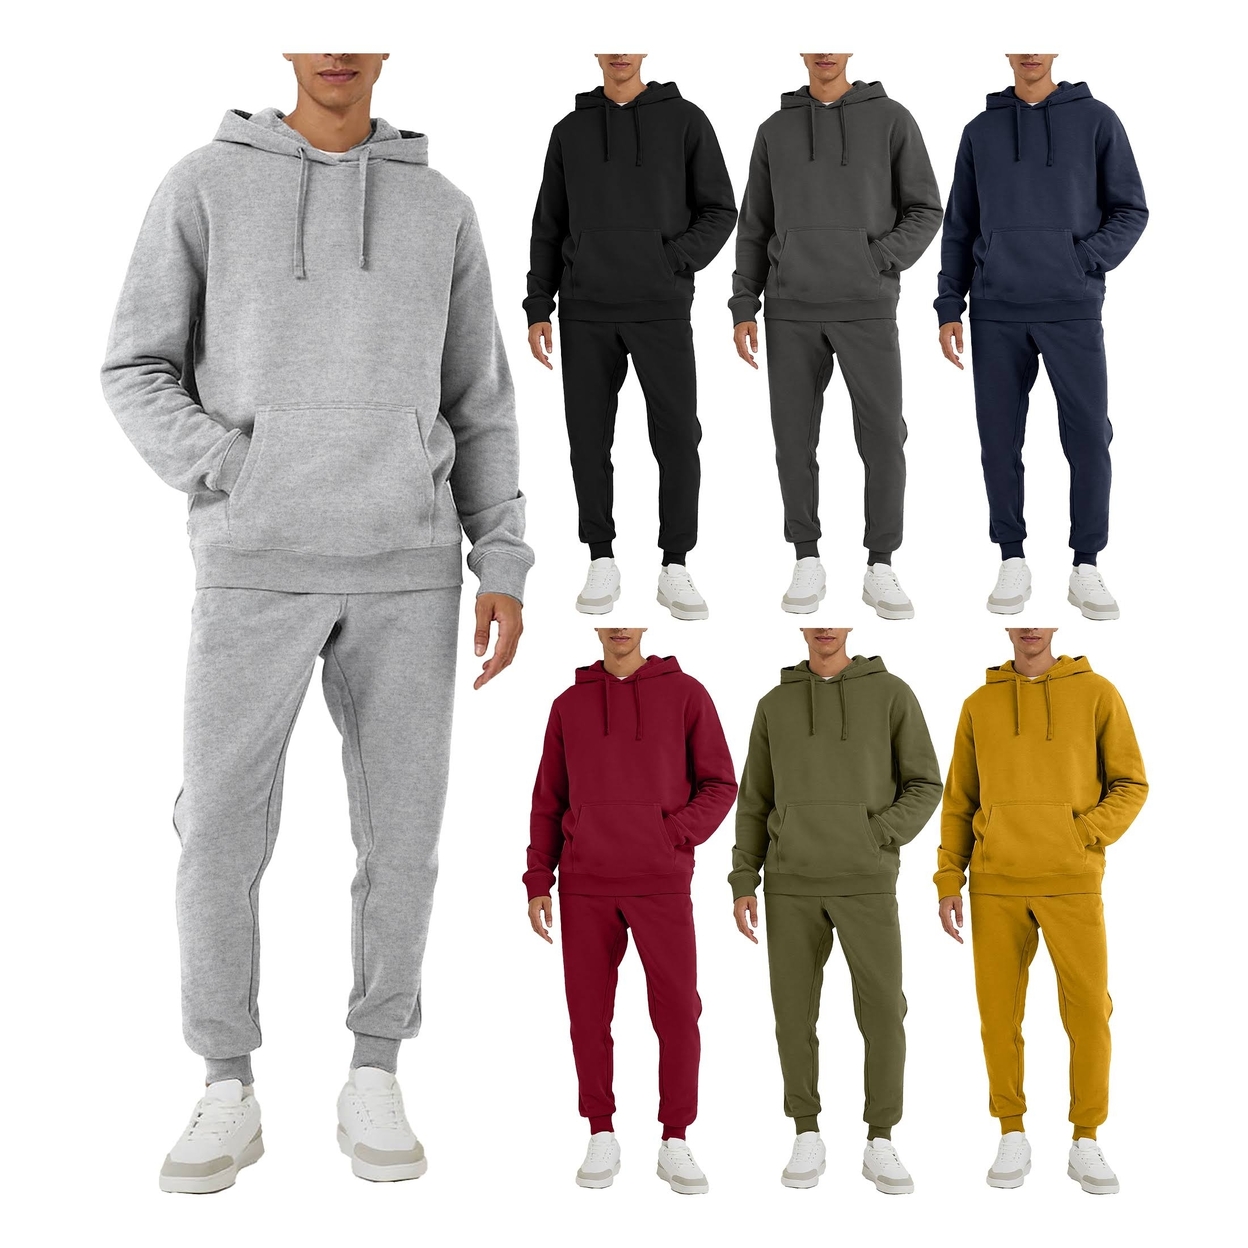 Men's Big & Tall Athletic Active Jogging Winter Warm Fleece Lined Pullover Tracksuit Set - Grey, Large